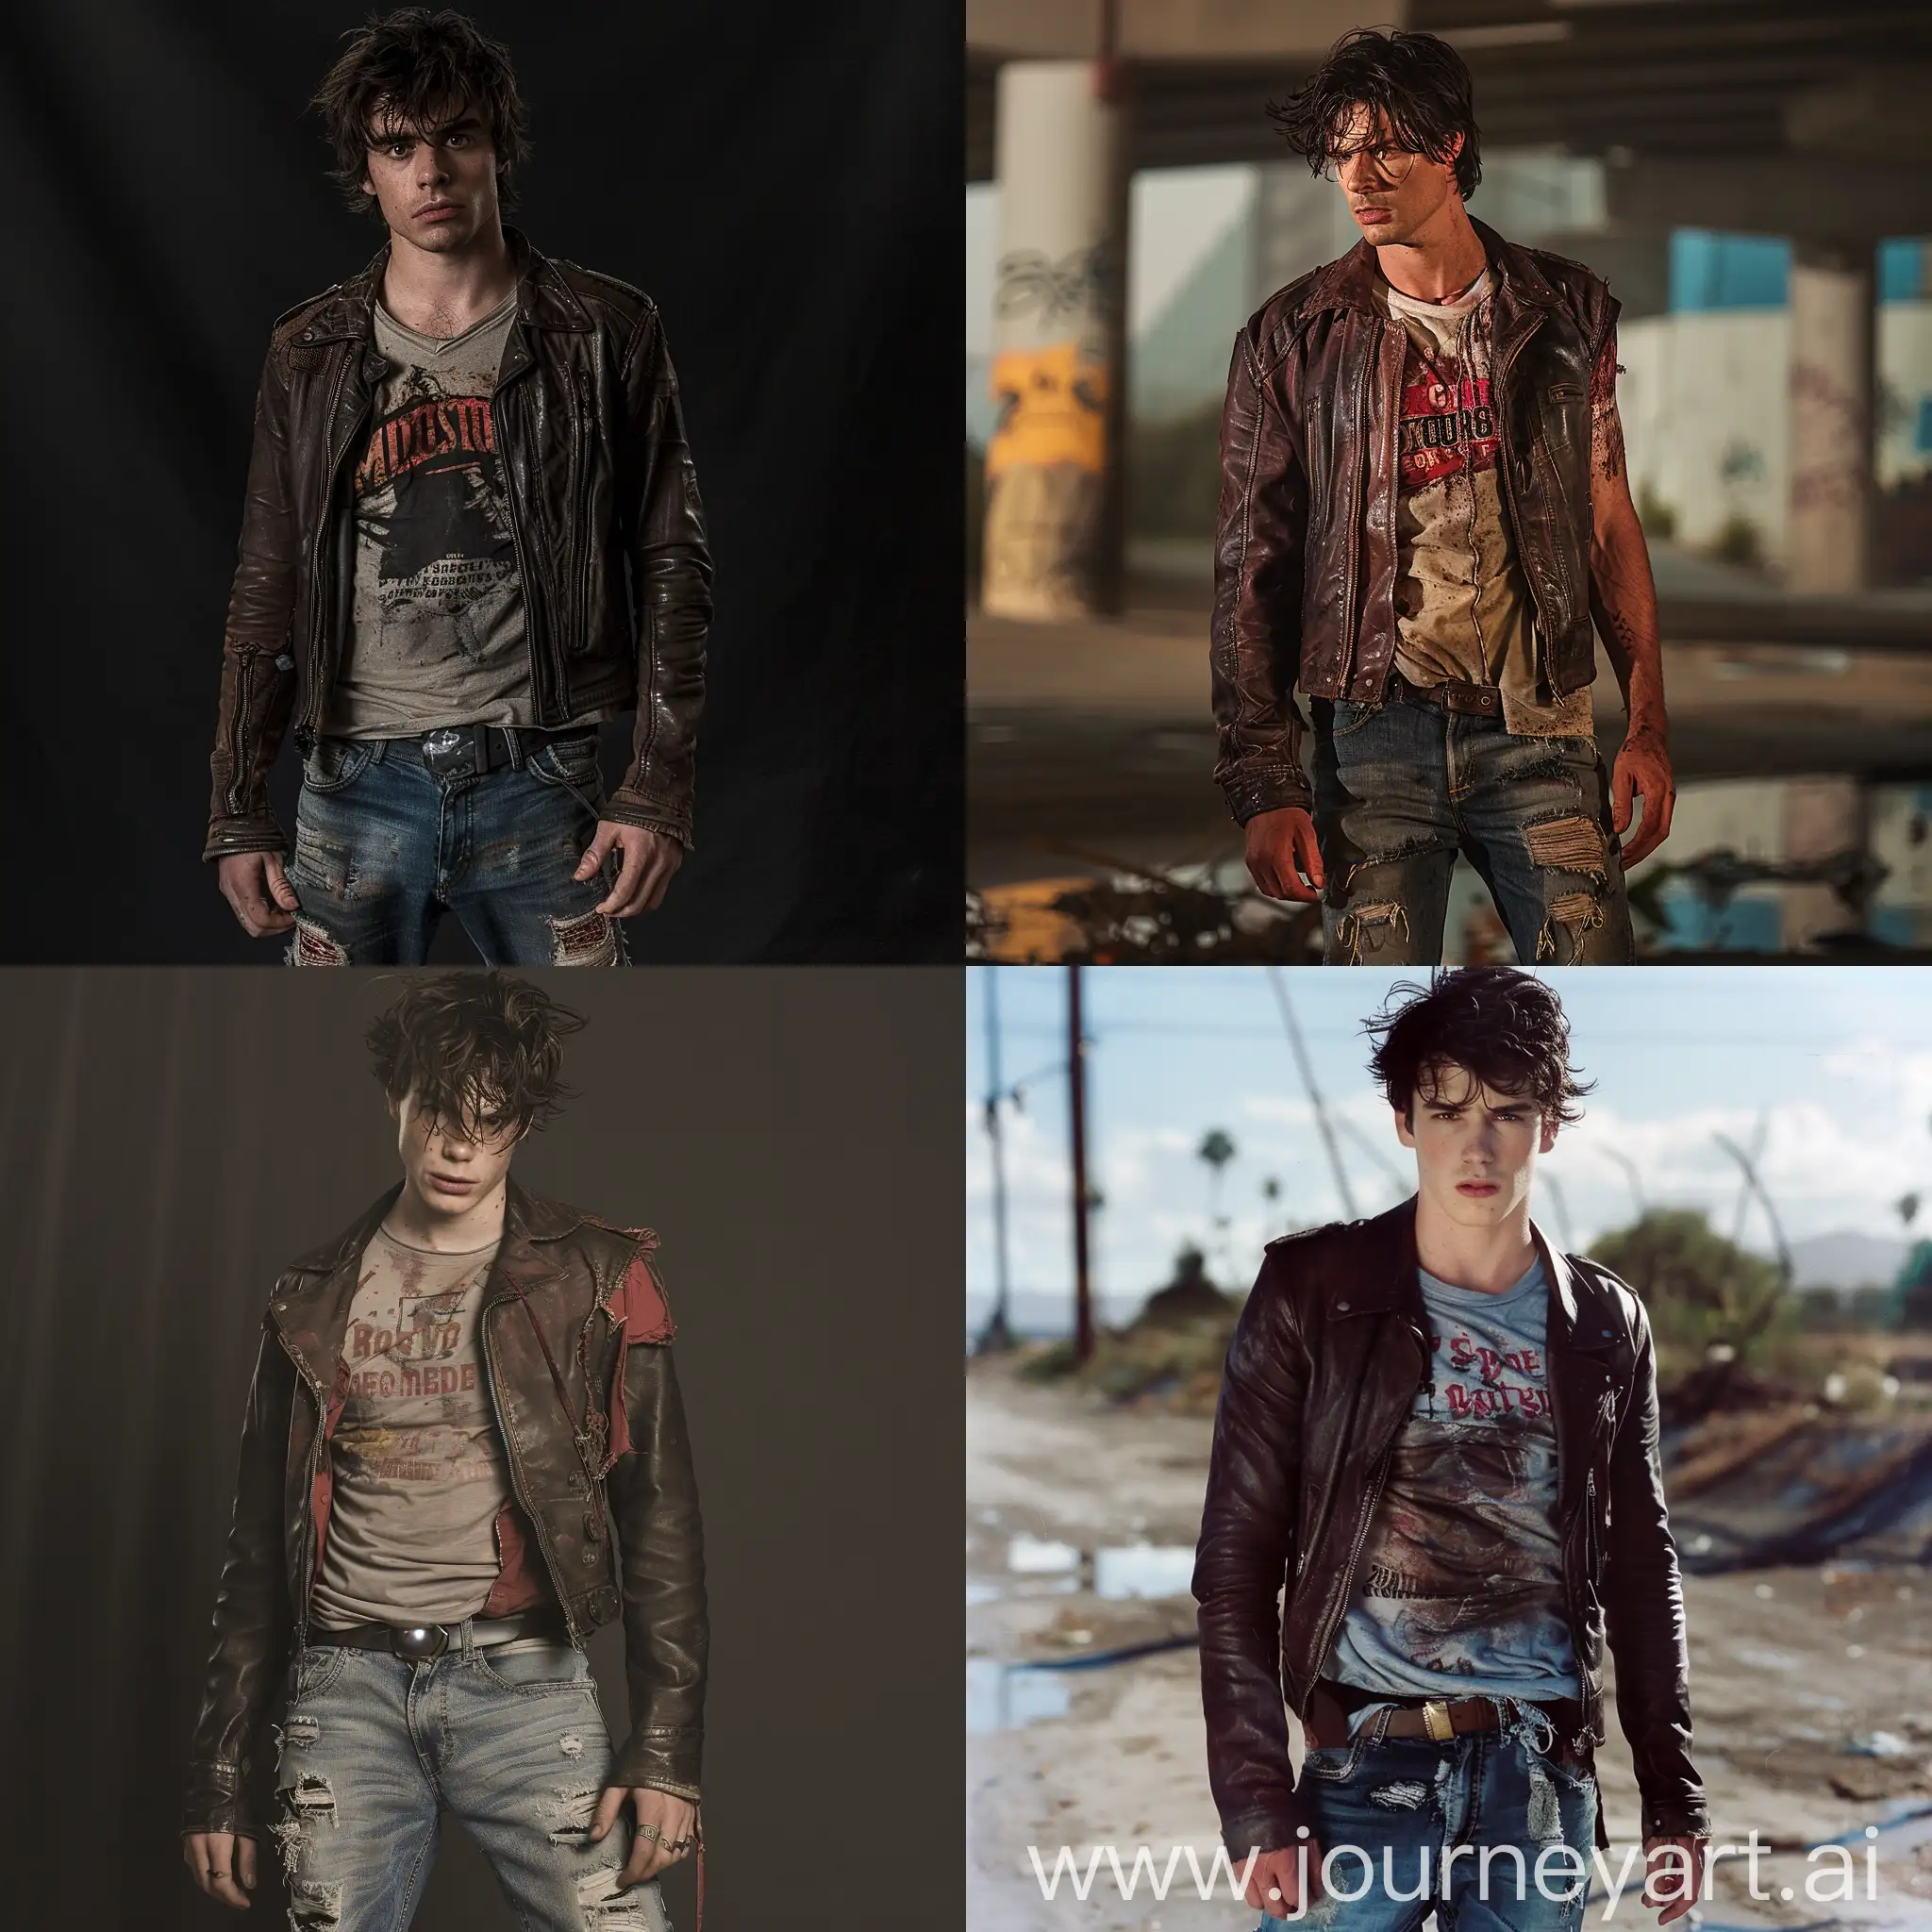 Cinematic-Shot-of-a-Lean-Man-in-Faded-Band-Attire-and-Leather-Jacket